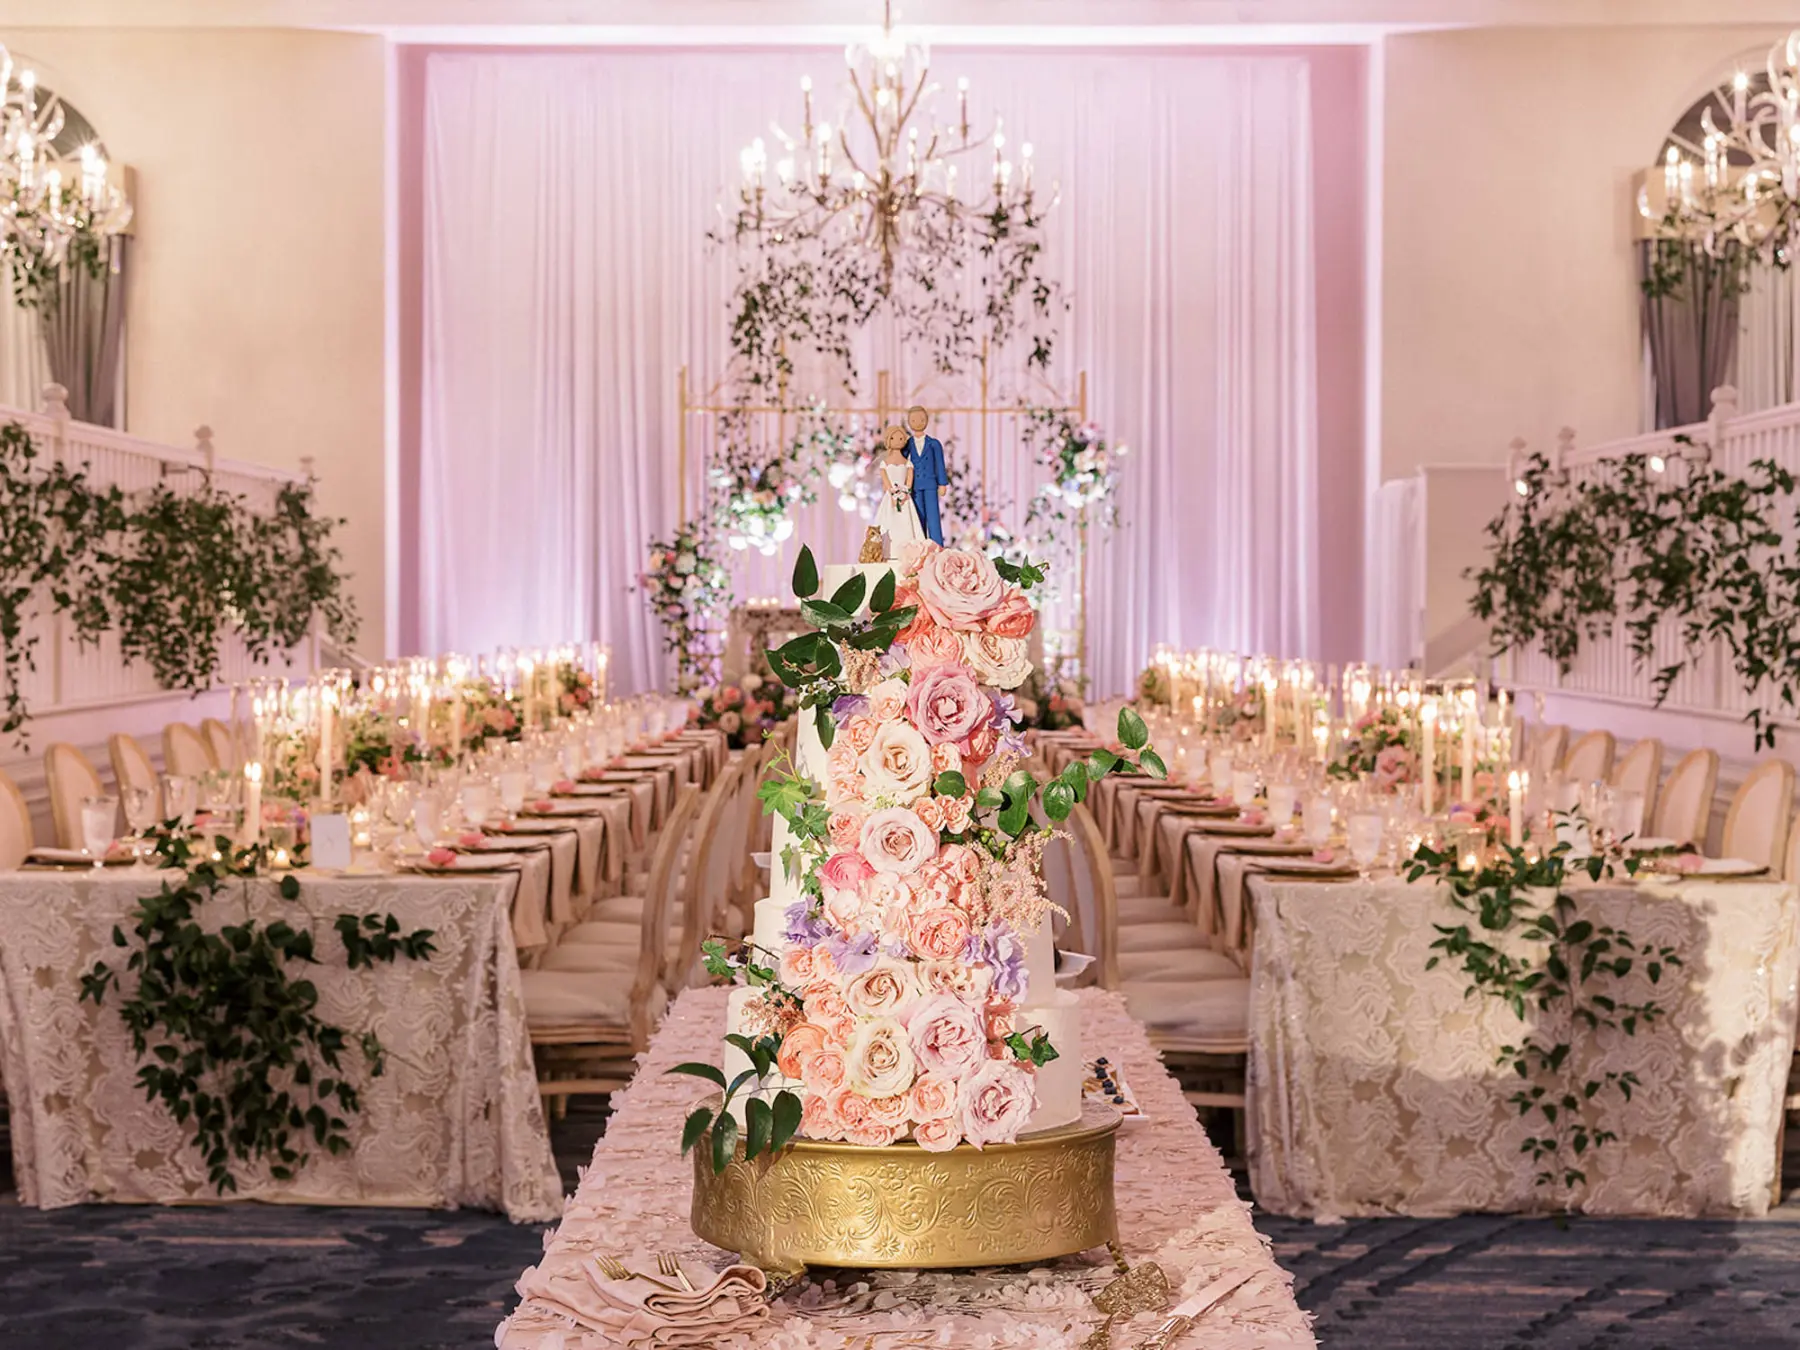 Whimsical Bridgerton Ballroom Wedding Reception Cake Table Inspiration | Cascading Pink Roses on Five-Tiered Wedding Cake Ideas | Tampa Bay Event Venue Don CeSar | St Pete Planner Unique Weddings and Events